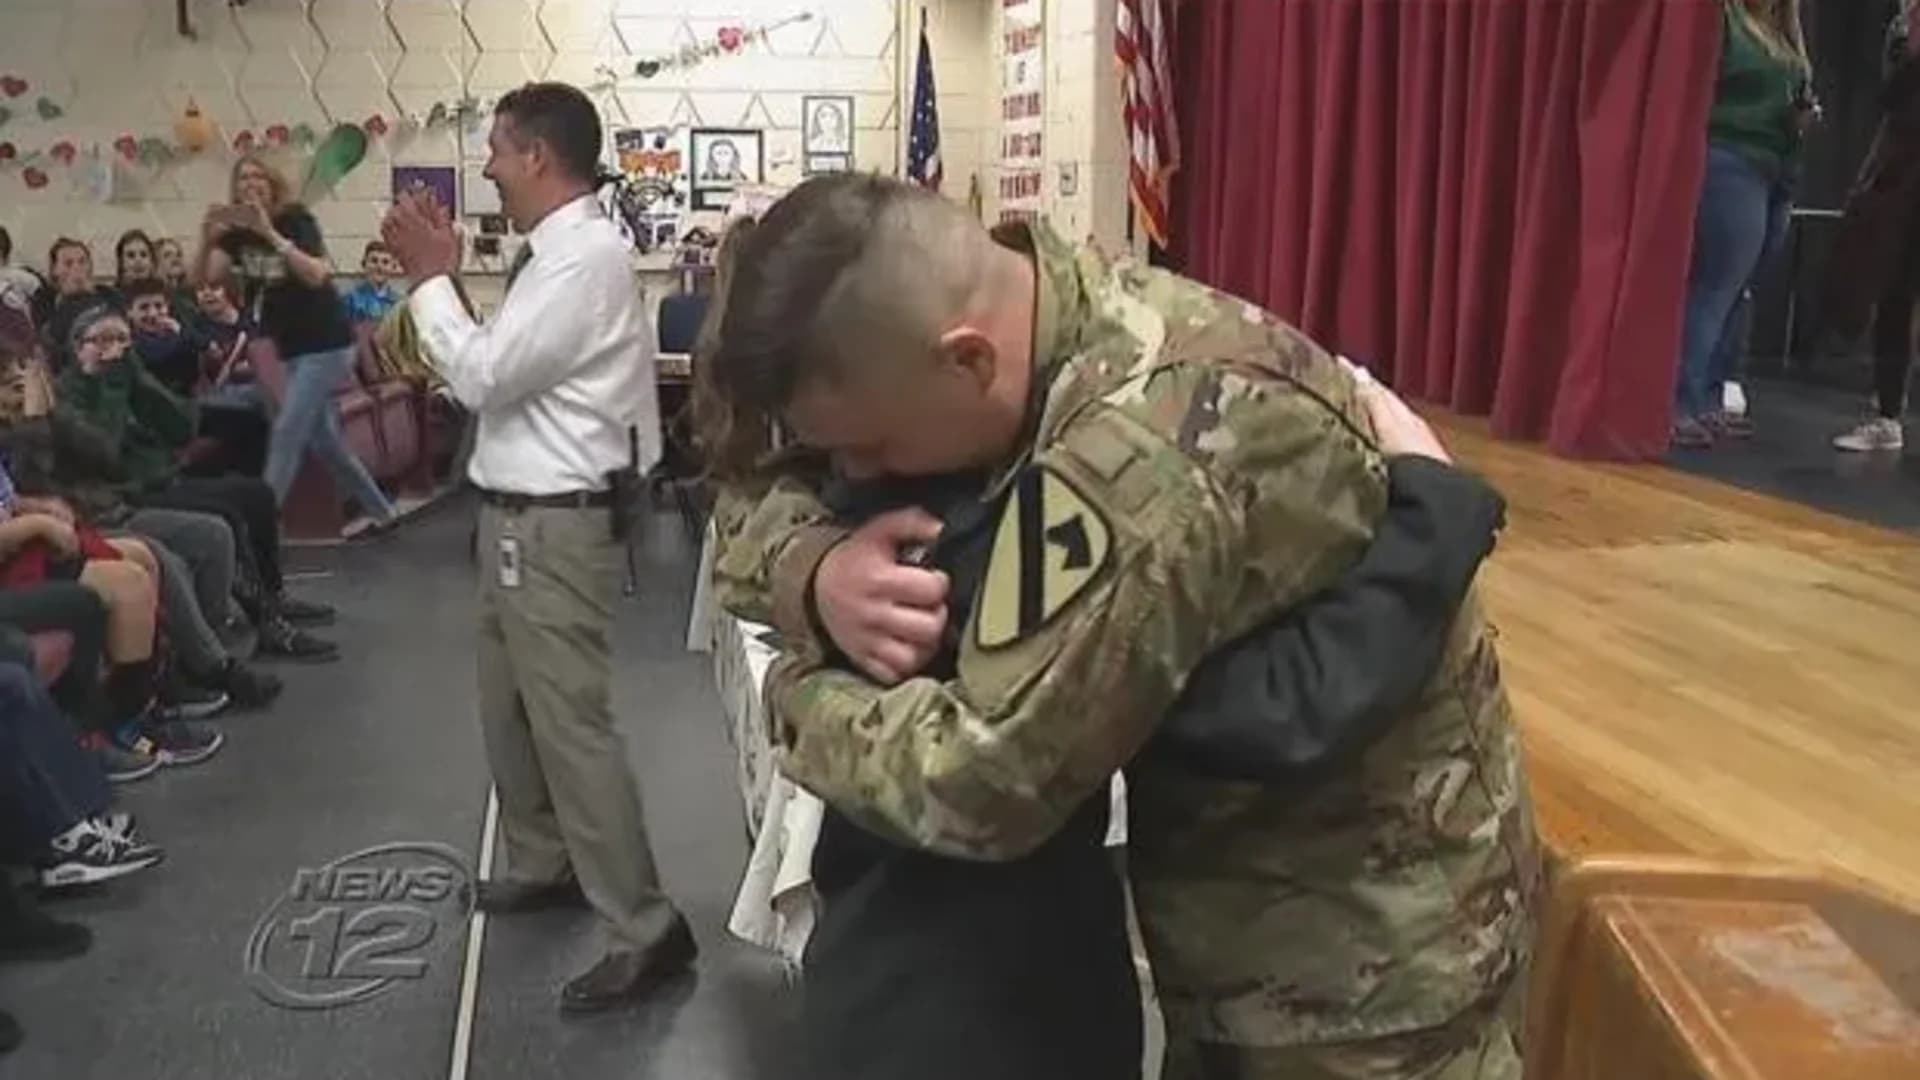 Military brother surprises younger sister at school assembly